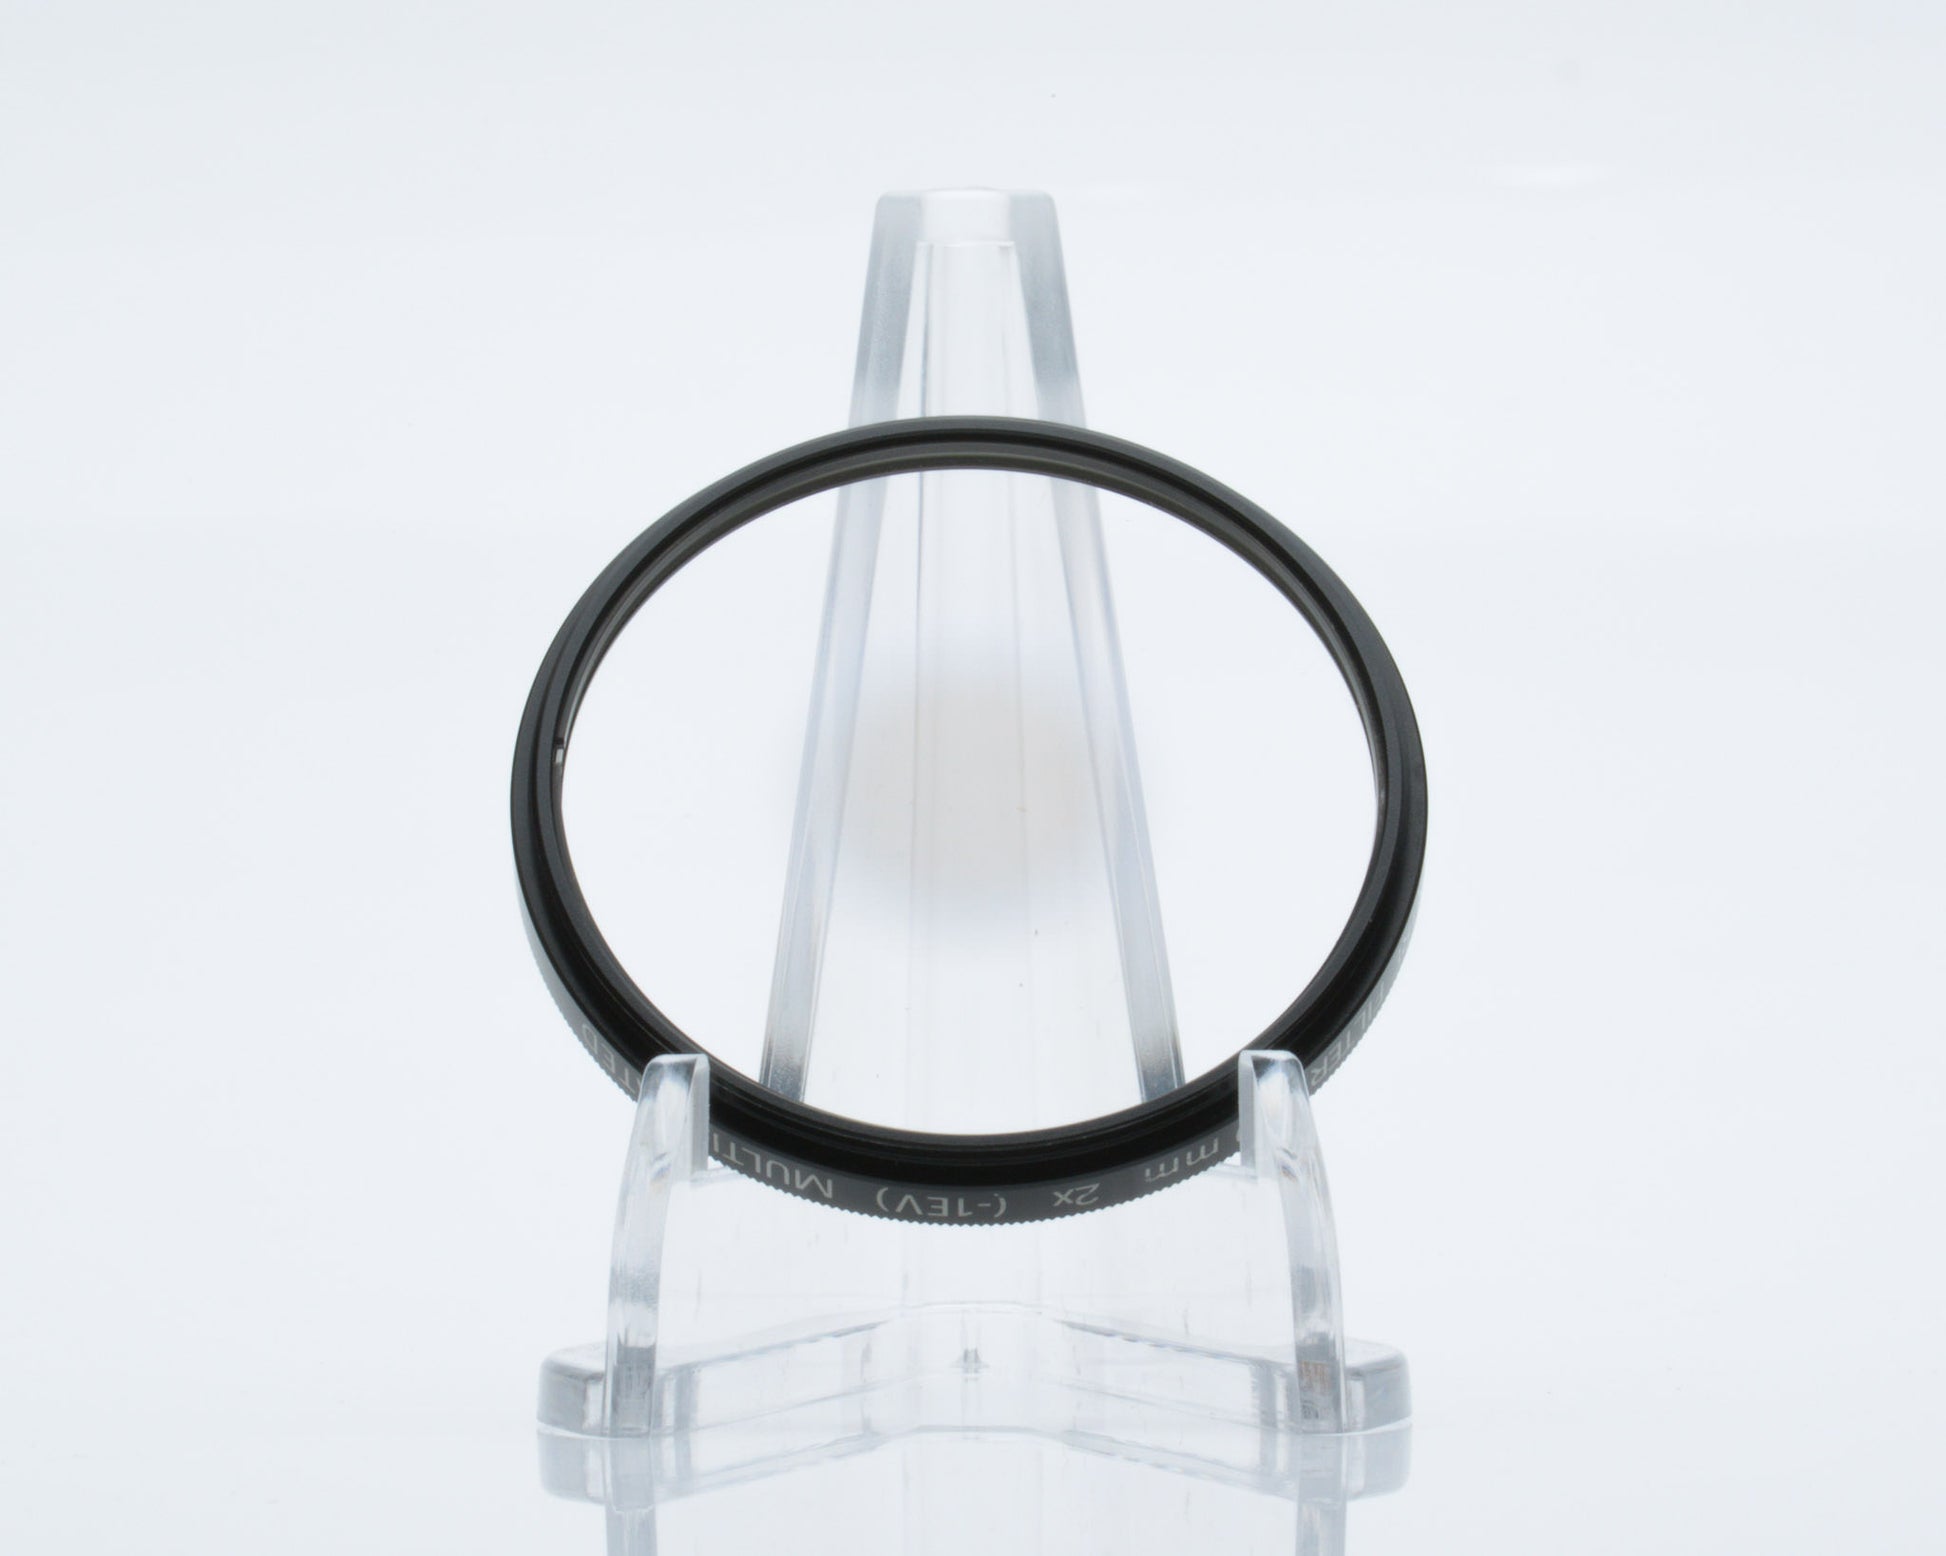 Hasselblad XPan 49mm Center Filter for 45mm f/4 Lens 54453